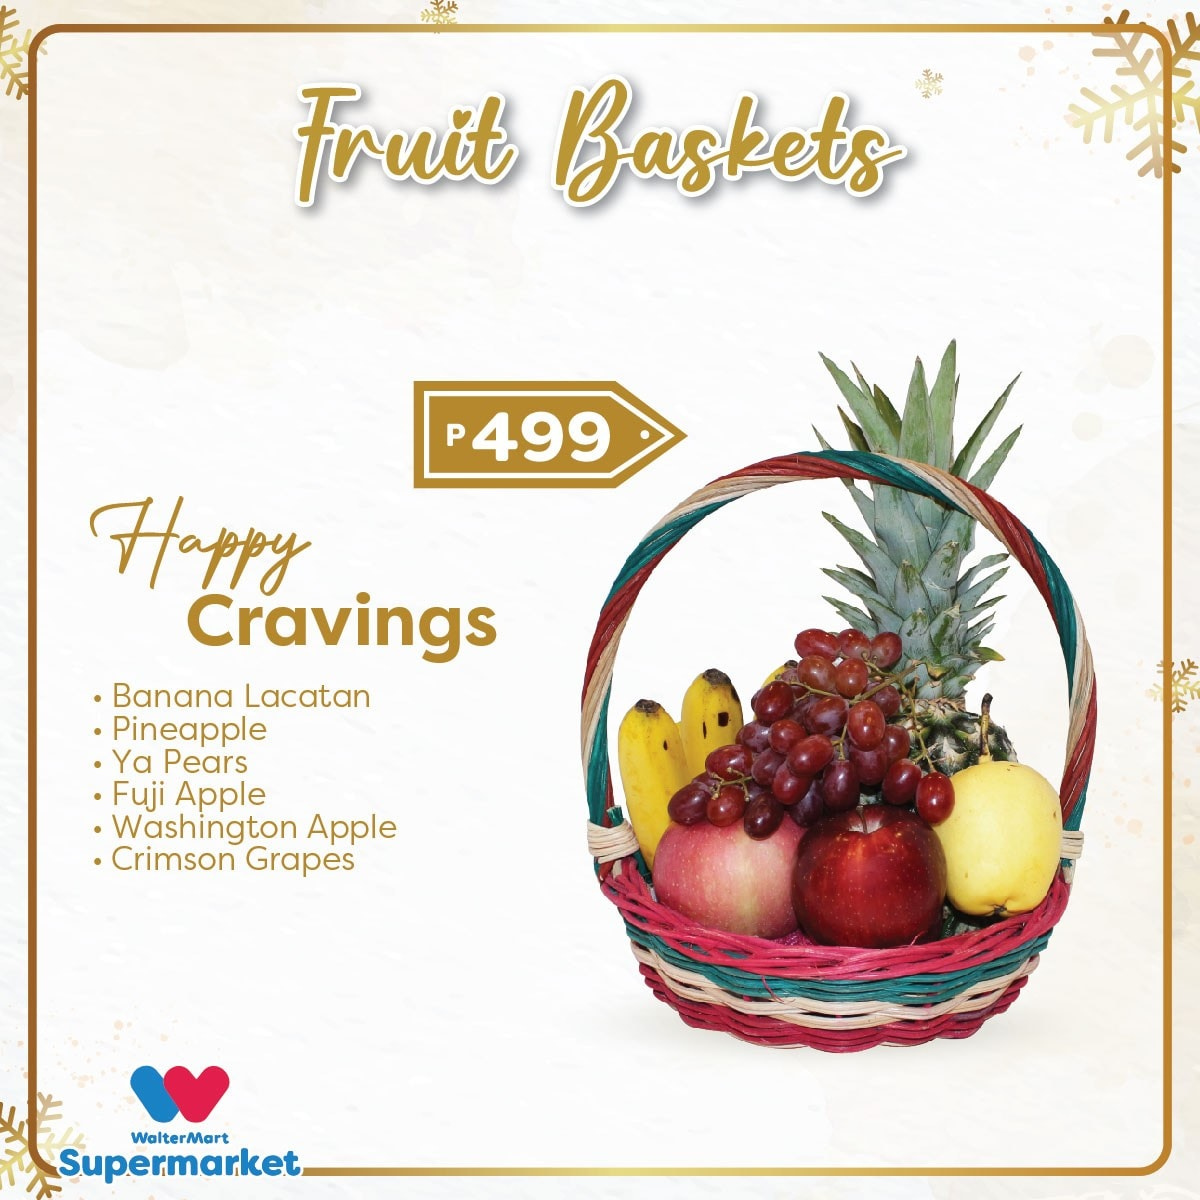 thumbnail - Walter Mart offer  - Sales products - grapes, pineapple, pears, Fuji apple. Page 12.